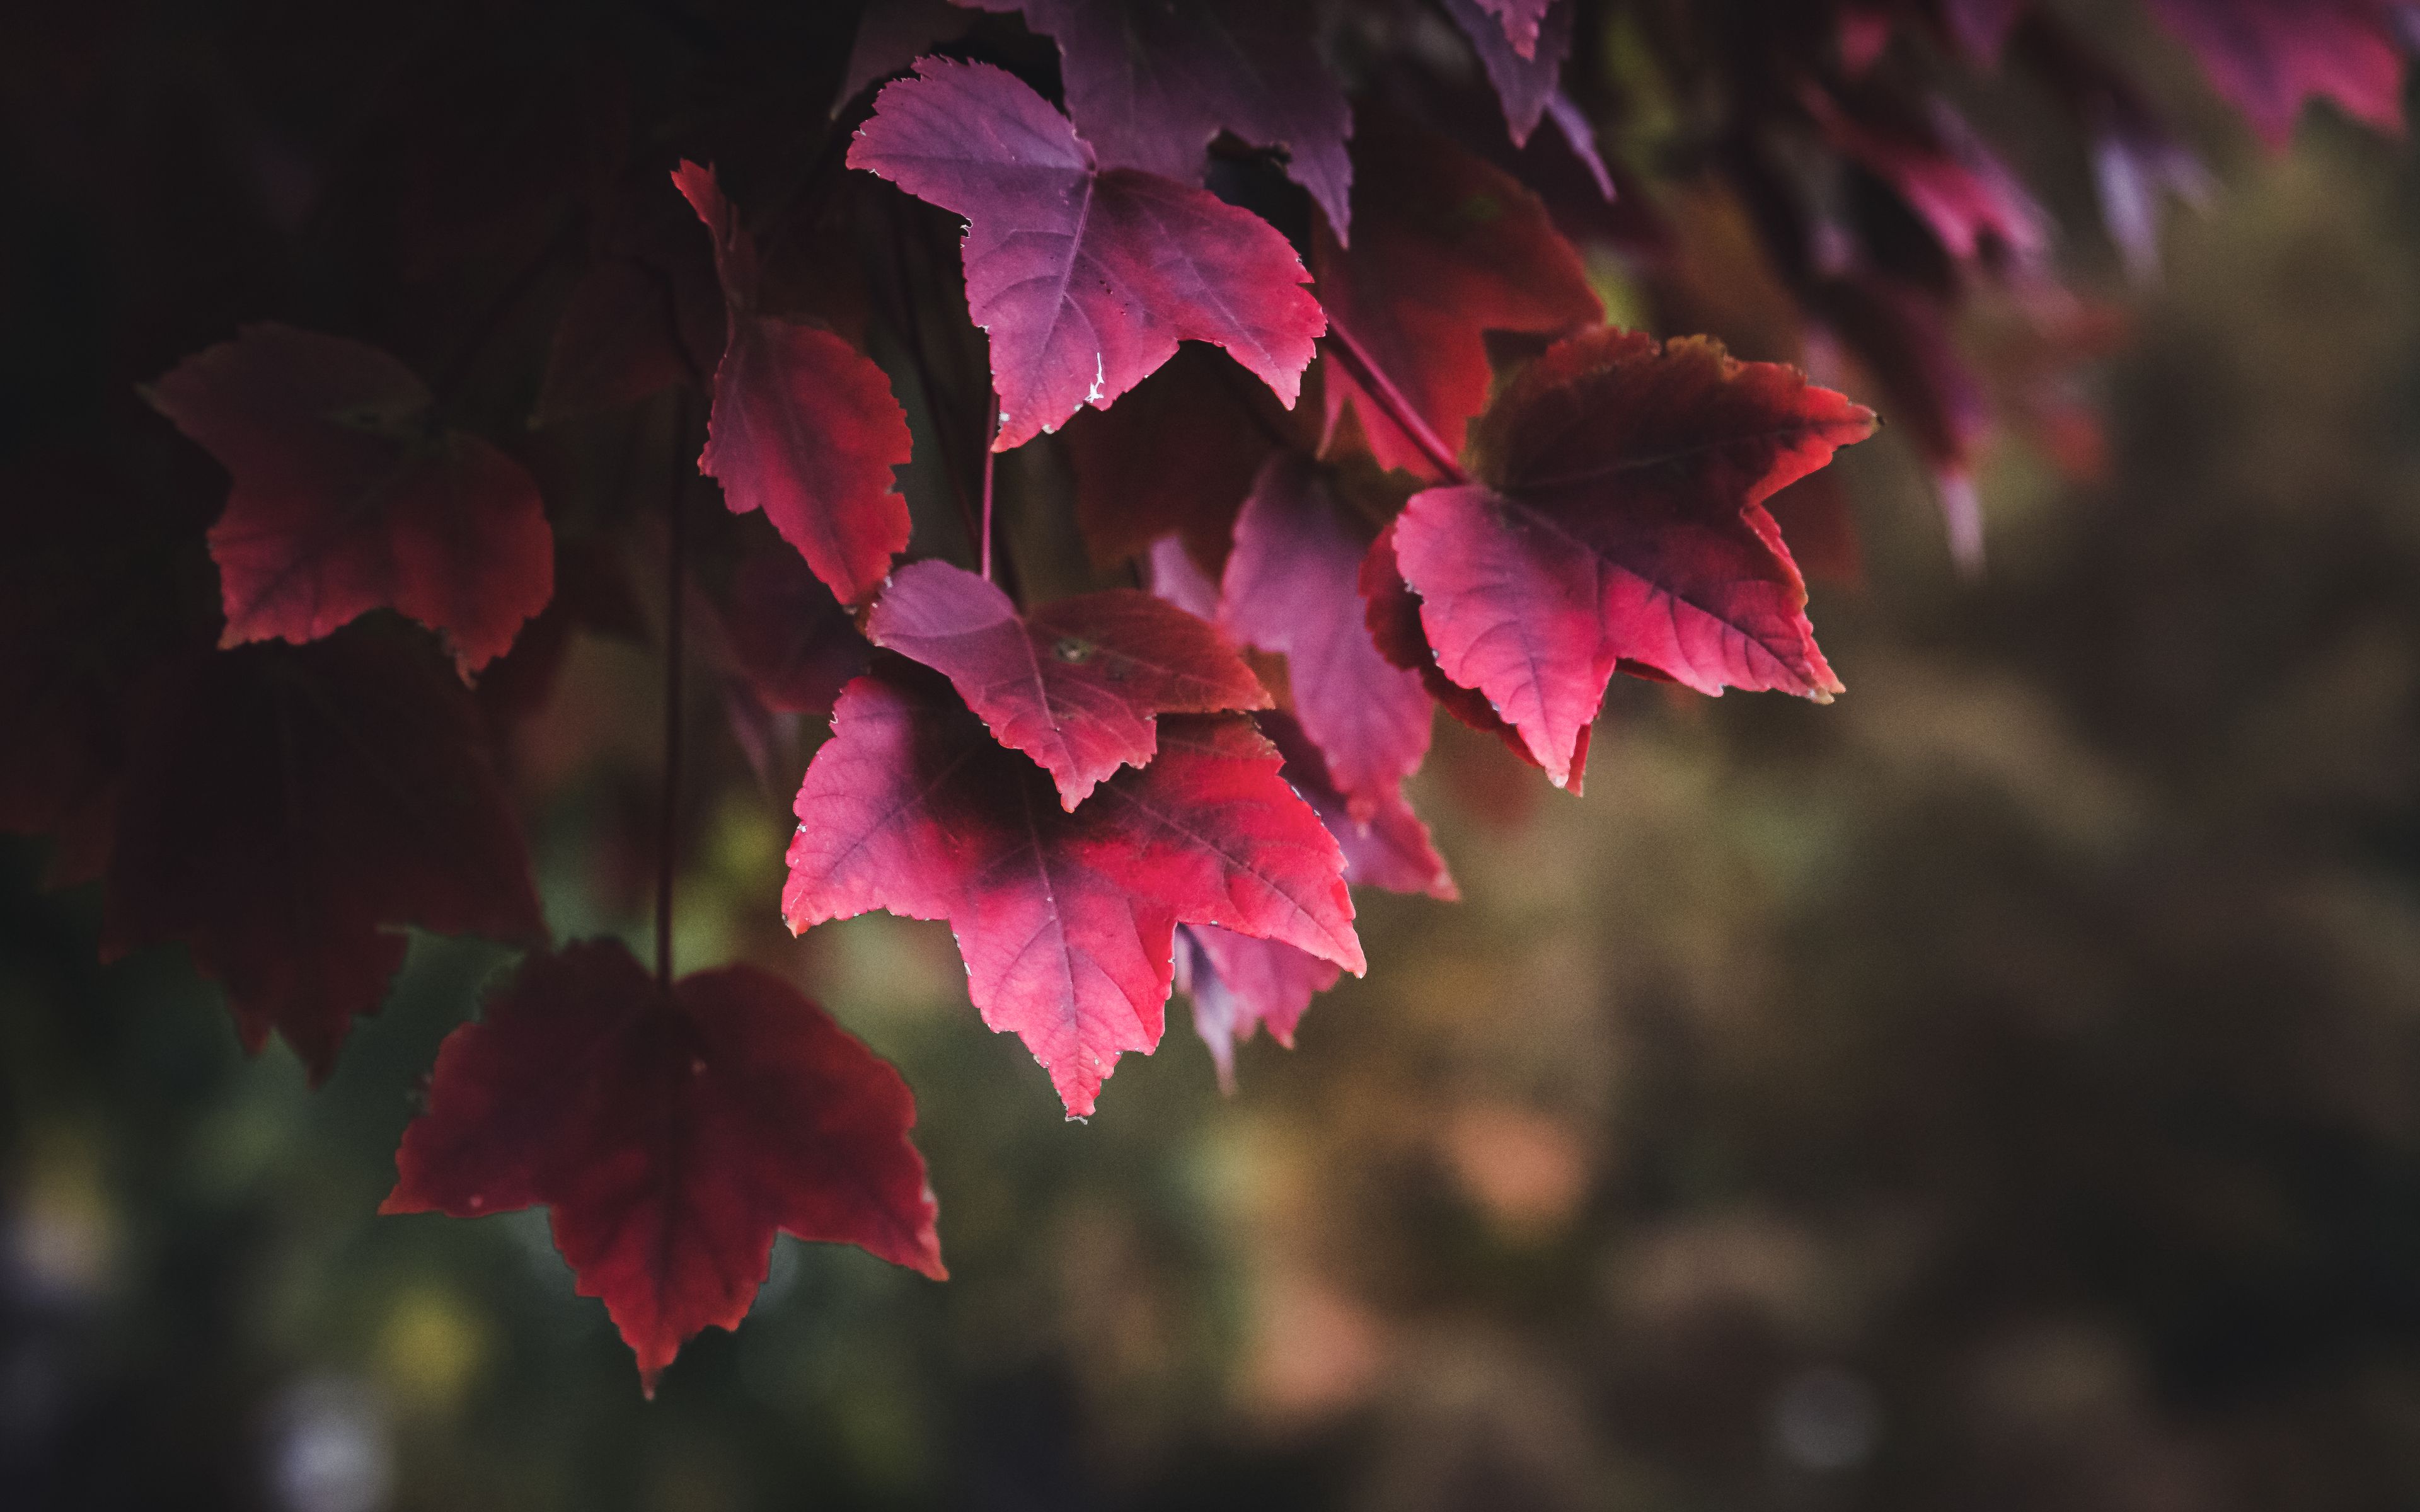 Download wallpaper 3840x2400 leaves, red, plant, nature 4k ultra hd 16: ...